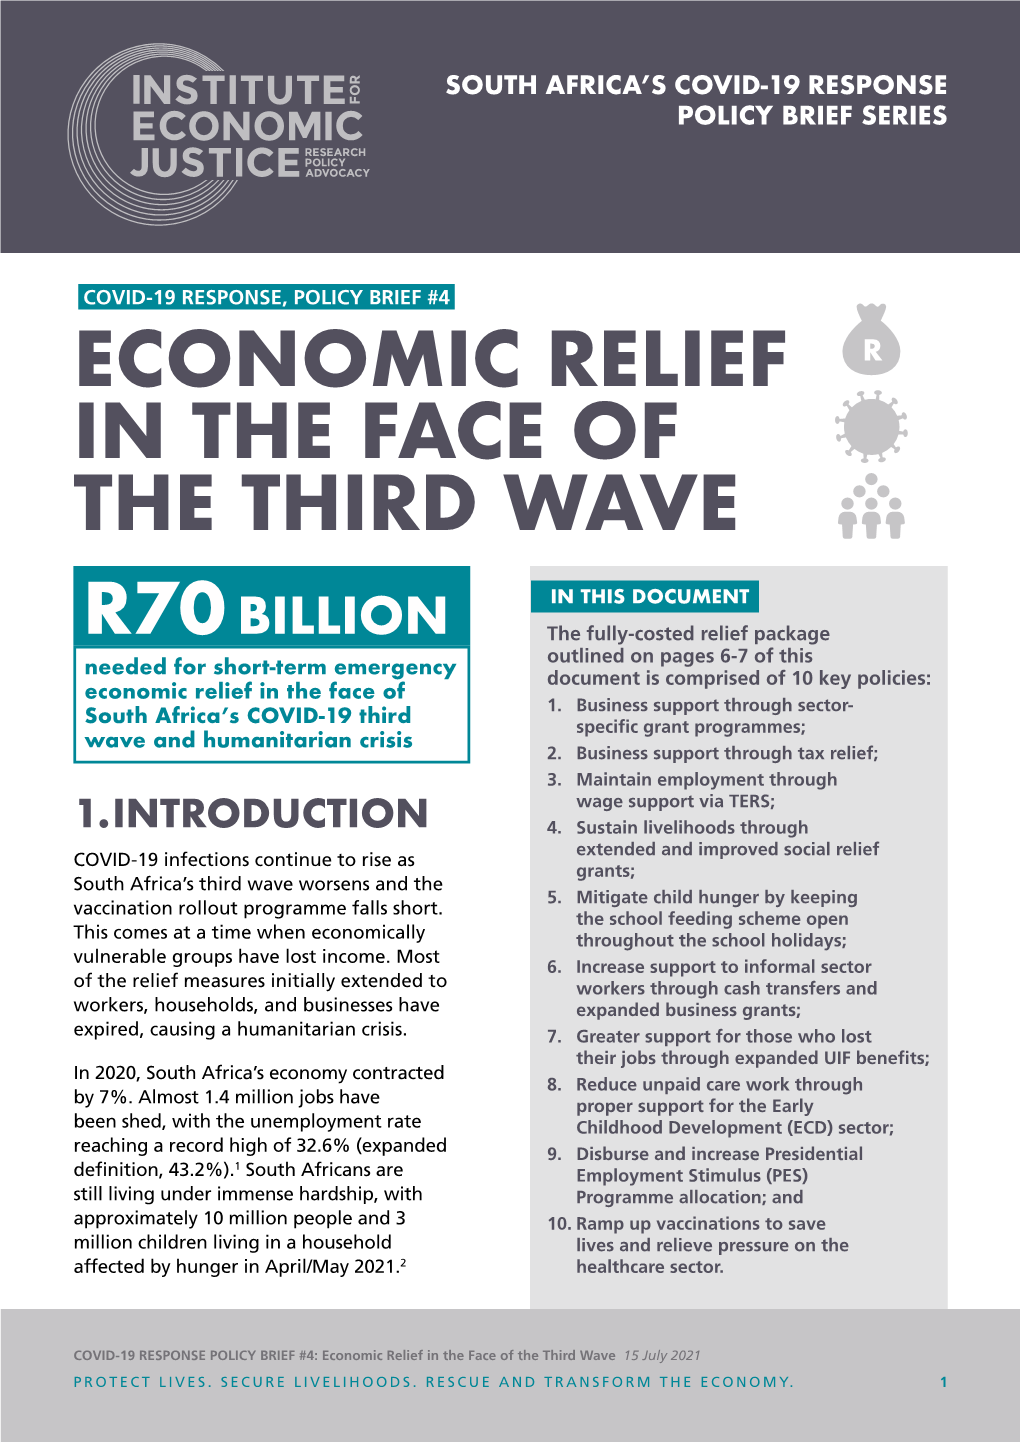 Economic Relief in the Face of the Third Wave